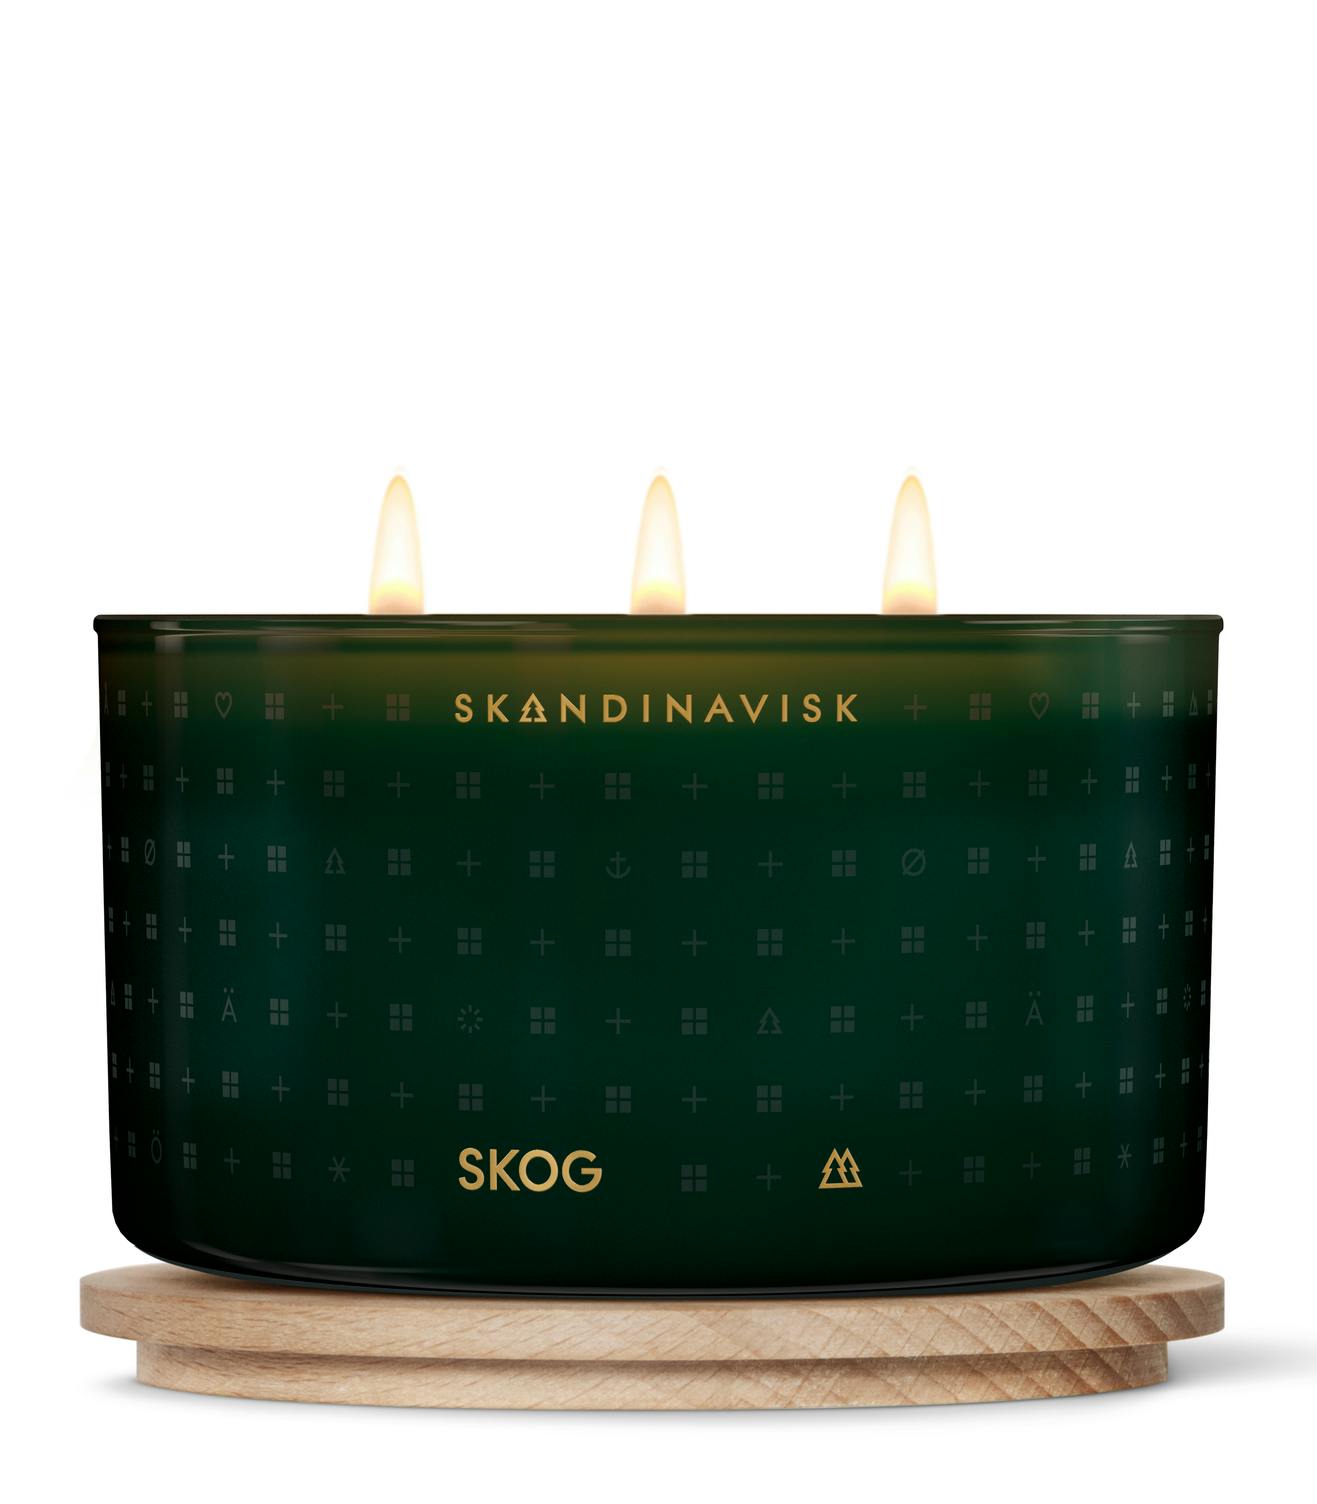 scented candles, vegan candles, organic candles, Skandinavisk, skog, forest, winter candles, Nordic gifts, 3 wick